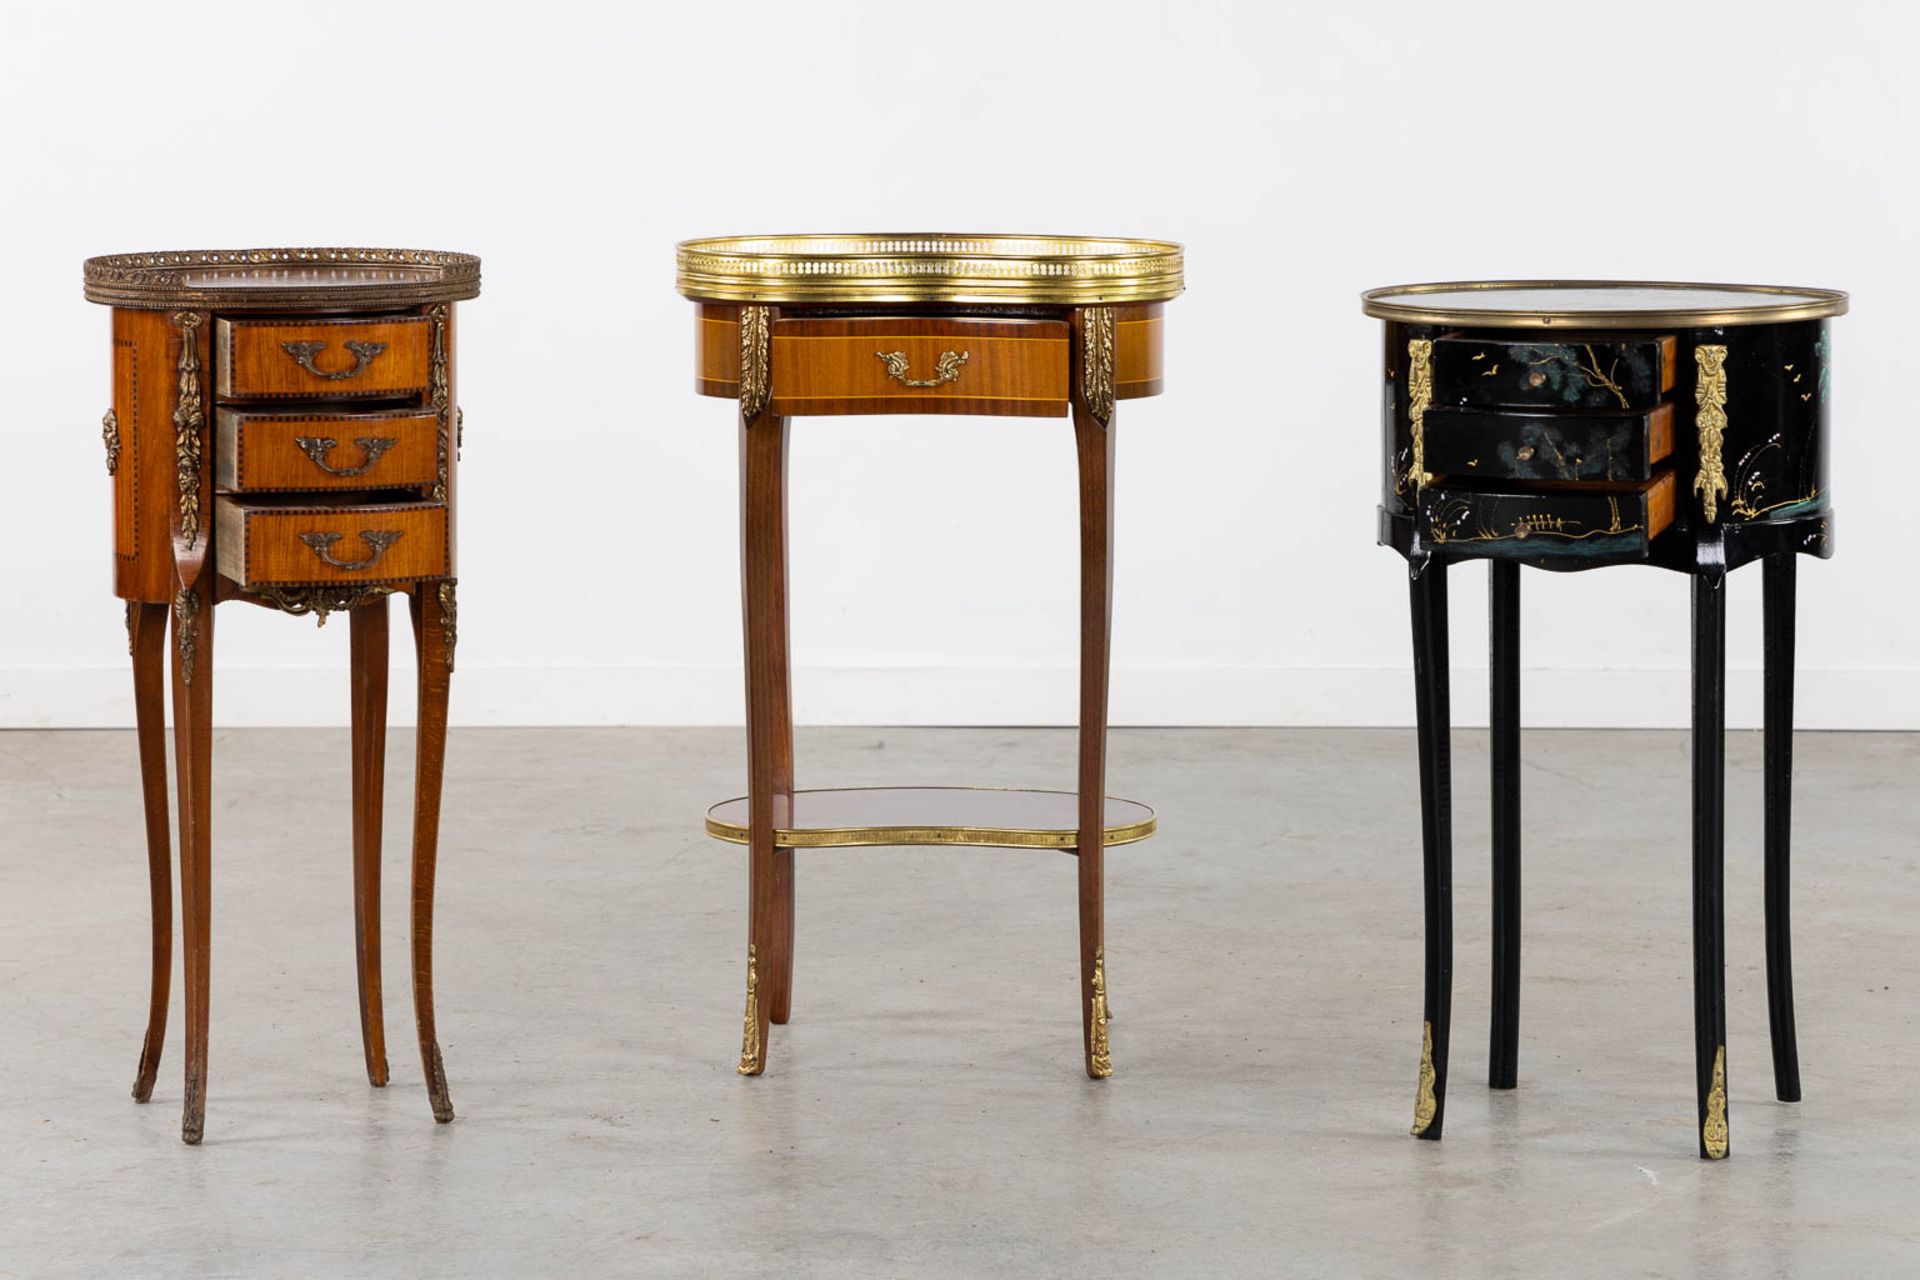 Three small side tables, marquetry and painted decor. 20th C. (L:30 x W:44 x H:71 cm) - Image 3 of 14